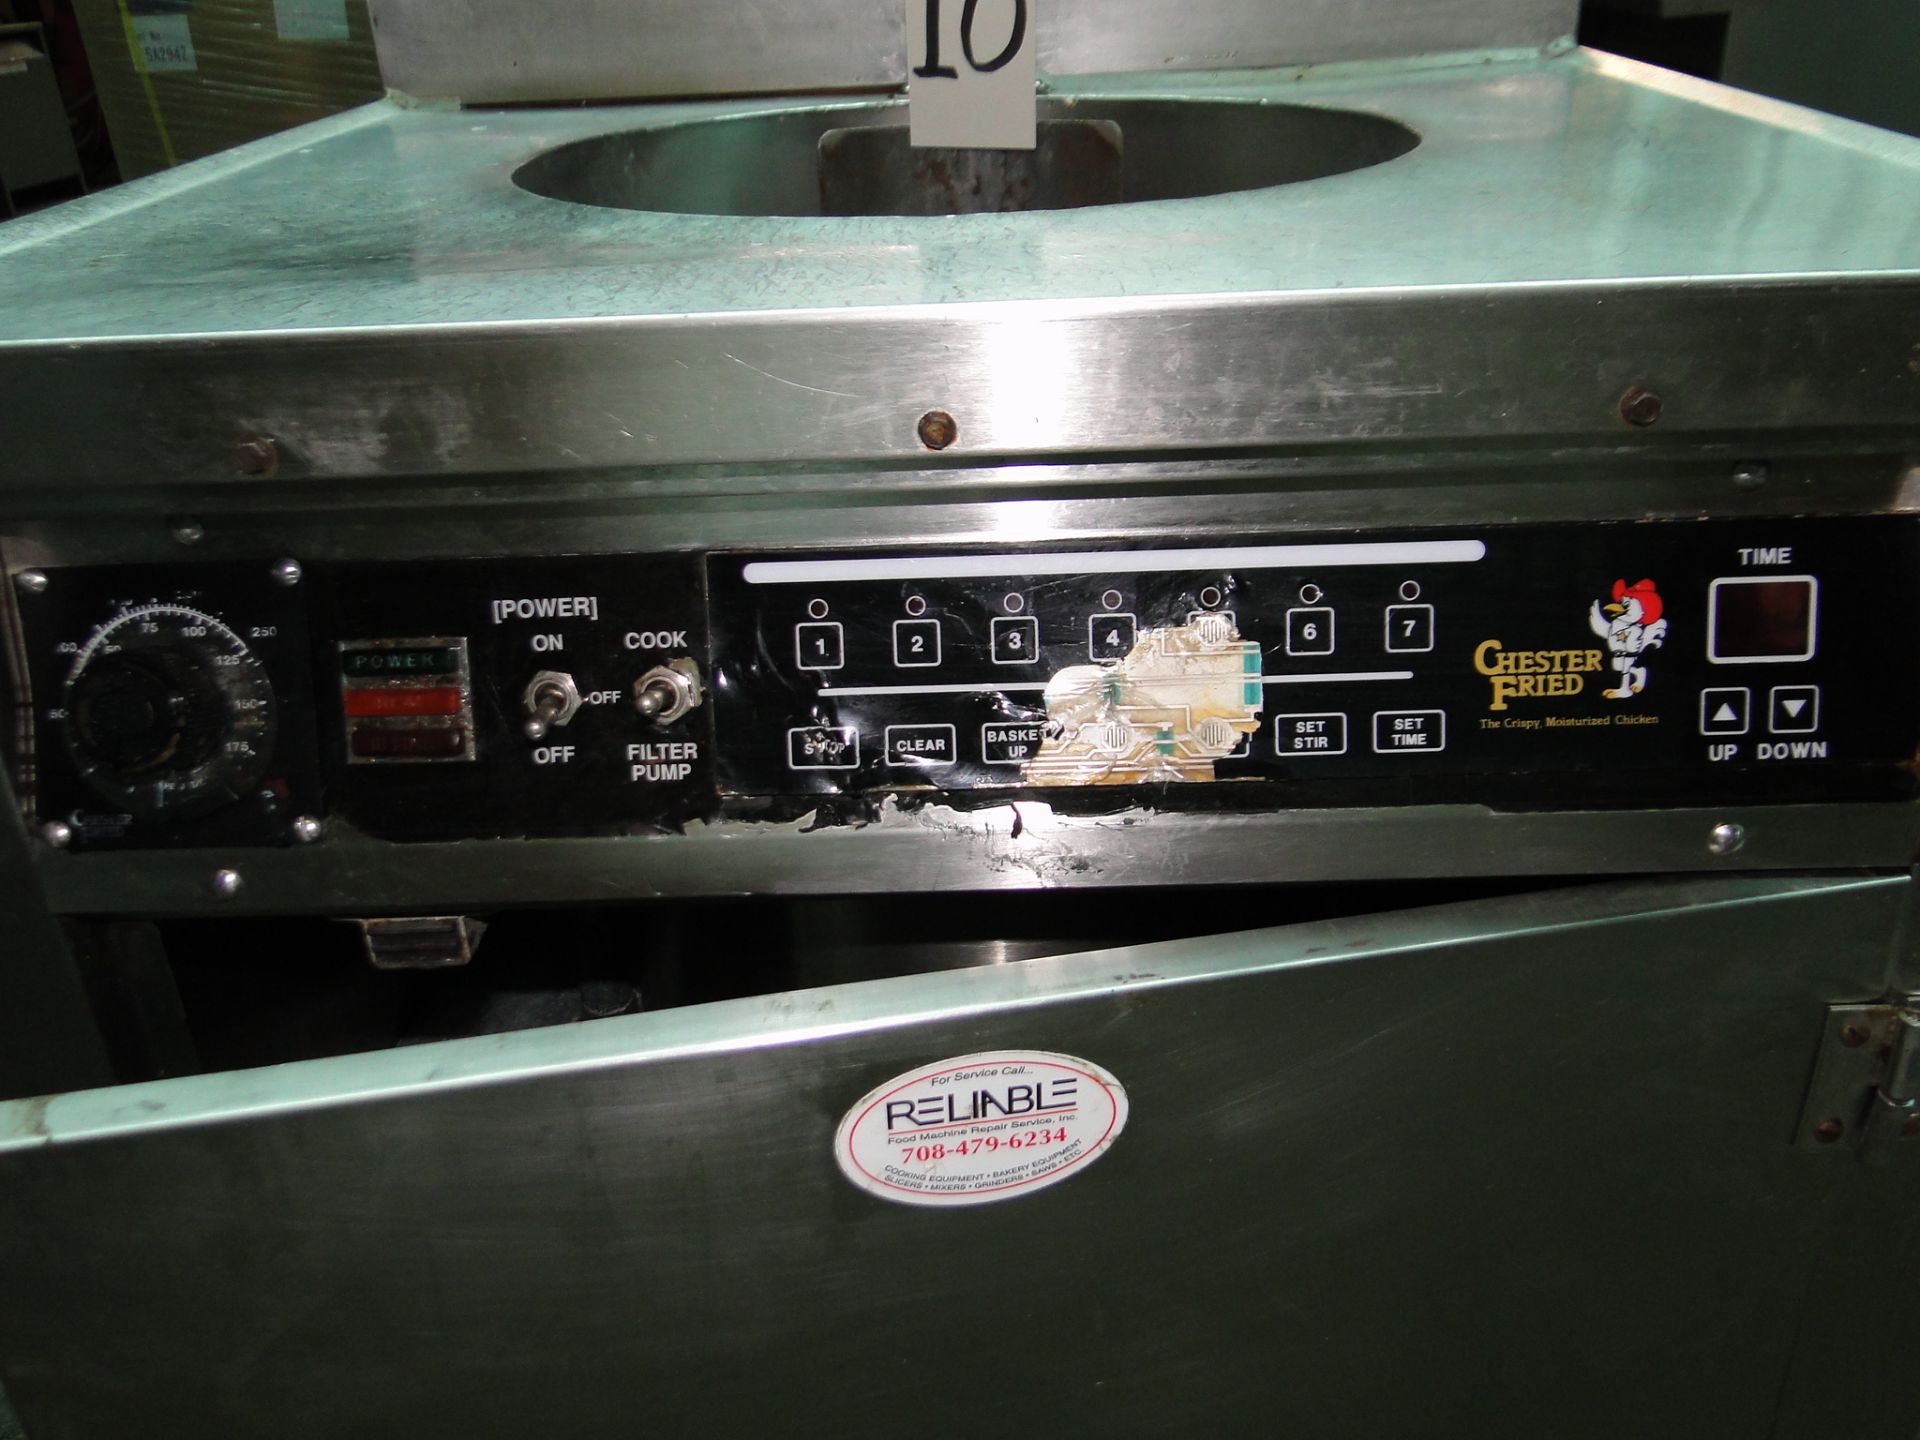 Giles "Chester Fried" Gas Fired Deep Fryer with Auto Lift, Model CF4006, S/N: A410109108, Equipped - Image 3 of 7